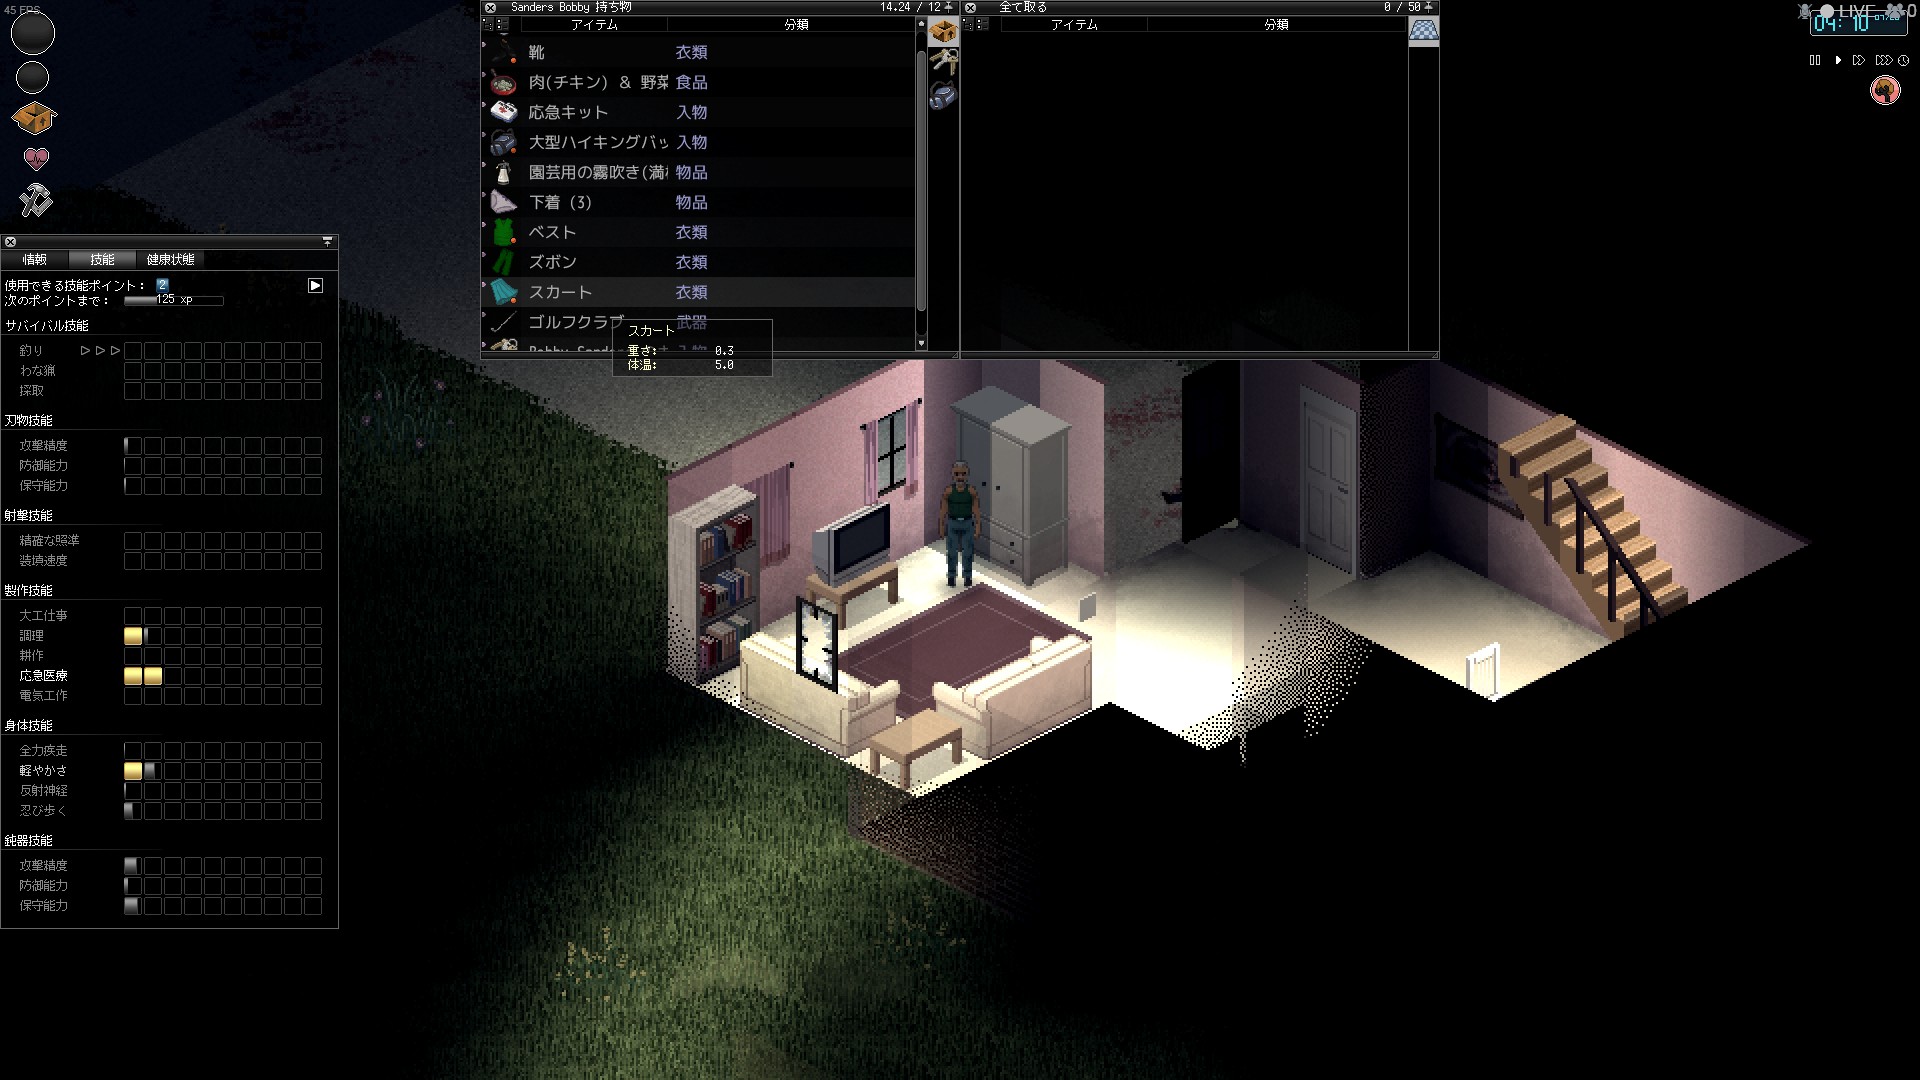 download project zomboid build for free